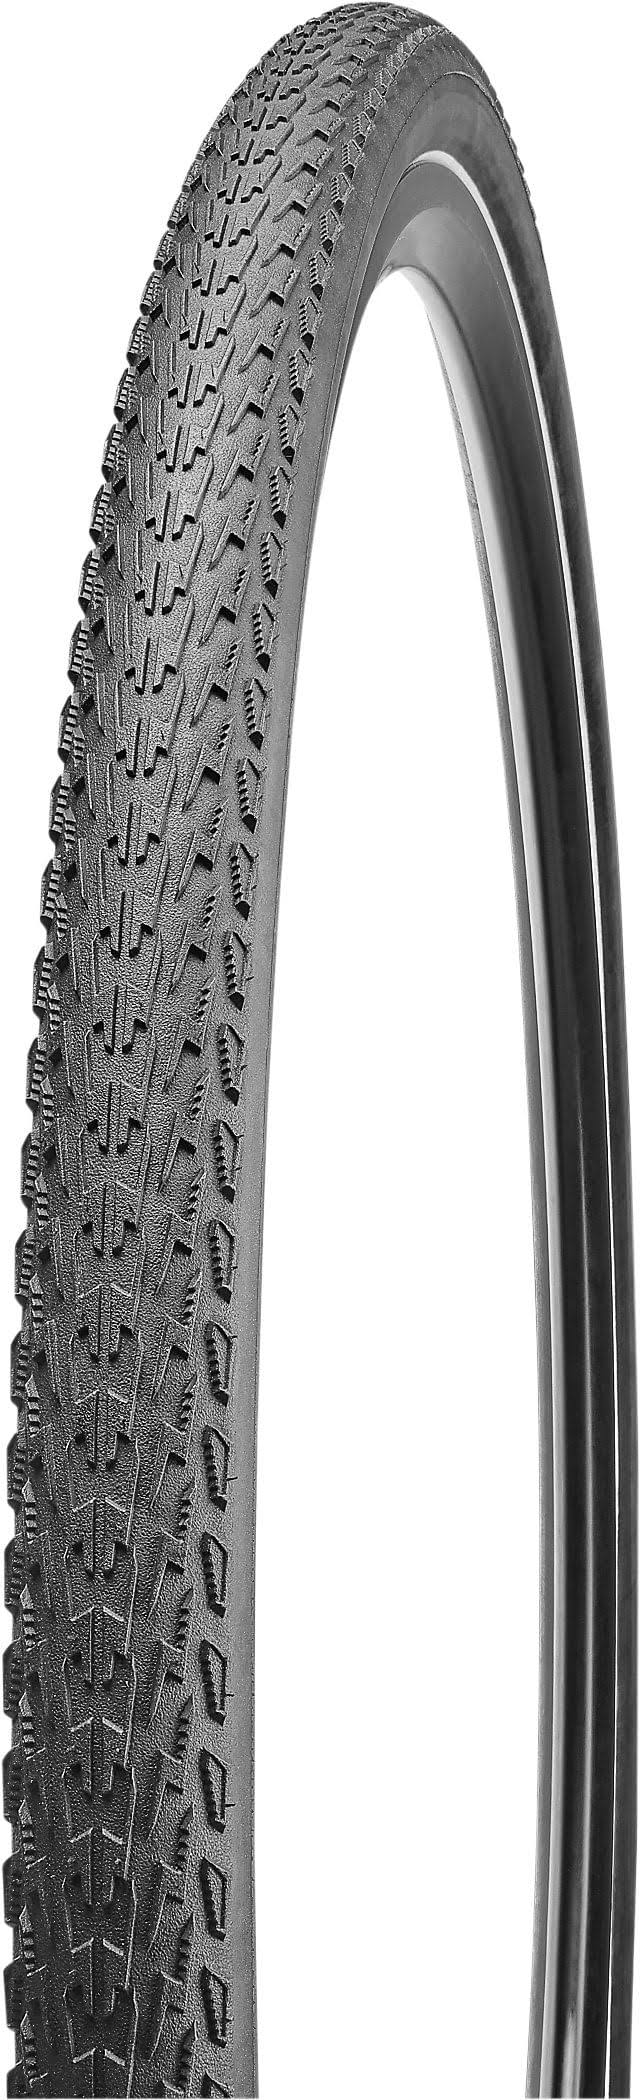 Specialized Tracer Pro 2Bliss Ready Cyclocross Tyre Black